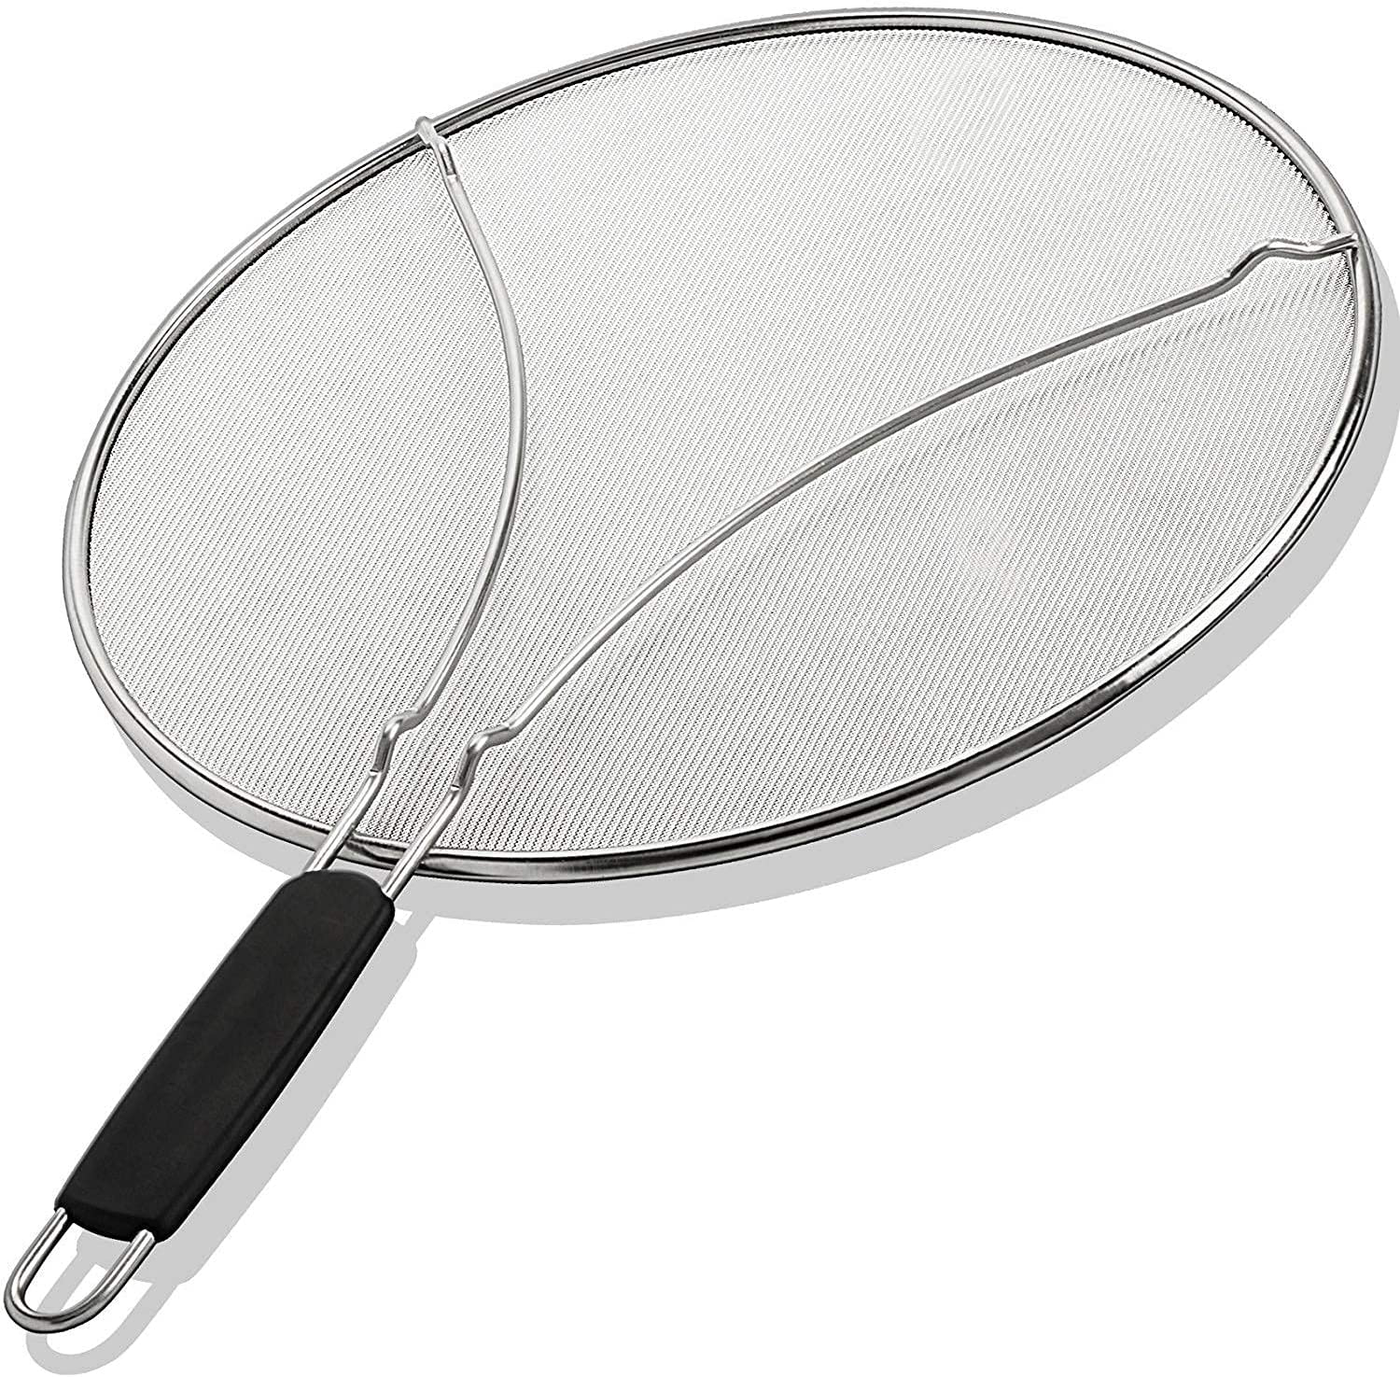 Grease Splatter Screen for Frying Pan 15" - Stops 99% of Hot Oil Splash - Protects Skin from Burns - Splatter Guard for Cooking - Iron Skillet Lid Keeps Kitchen Clean - Stainless Steel (15 inch)